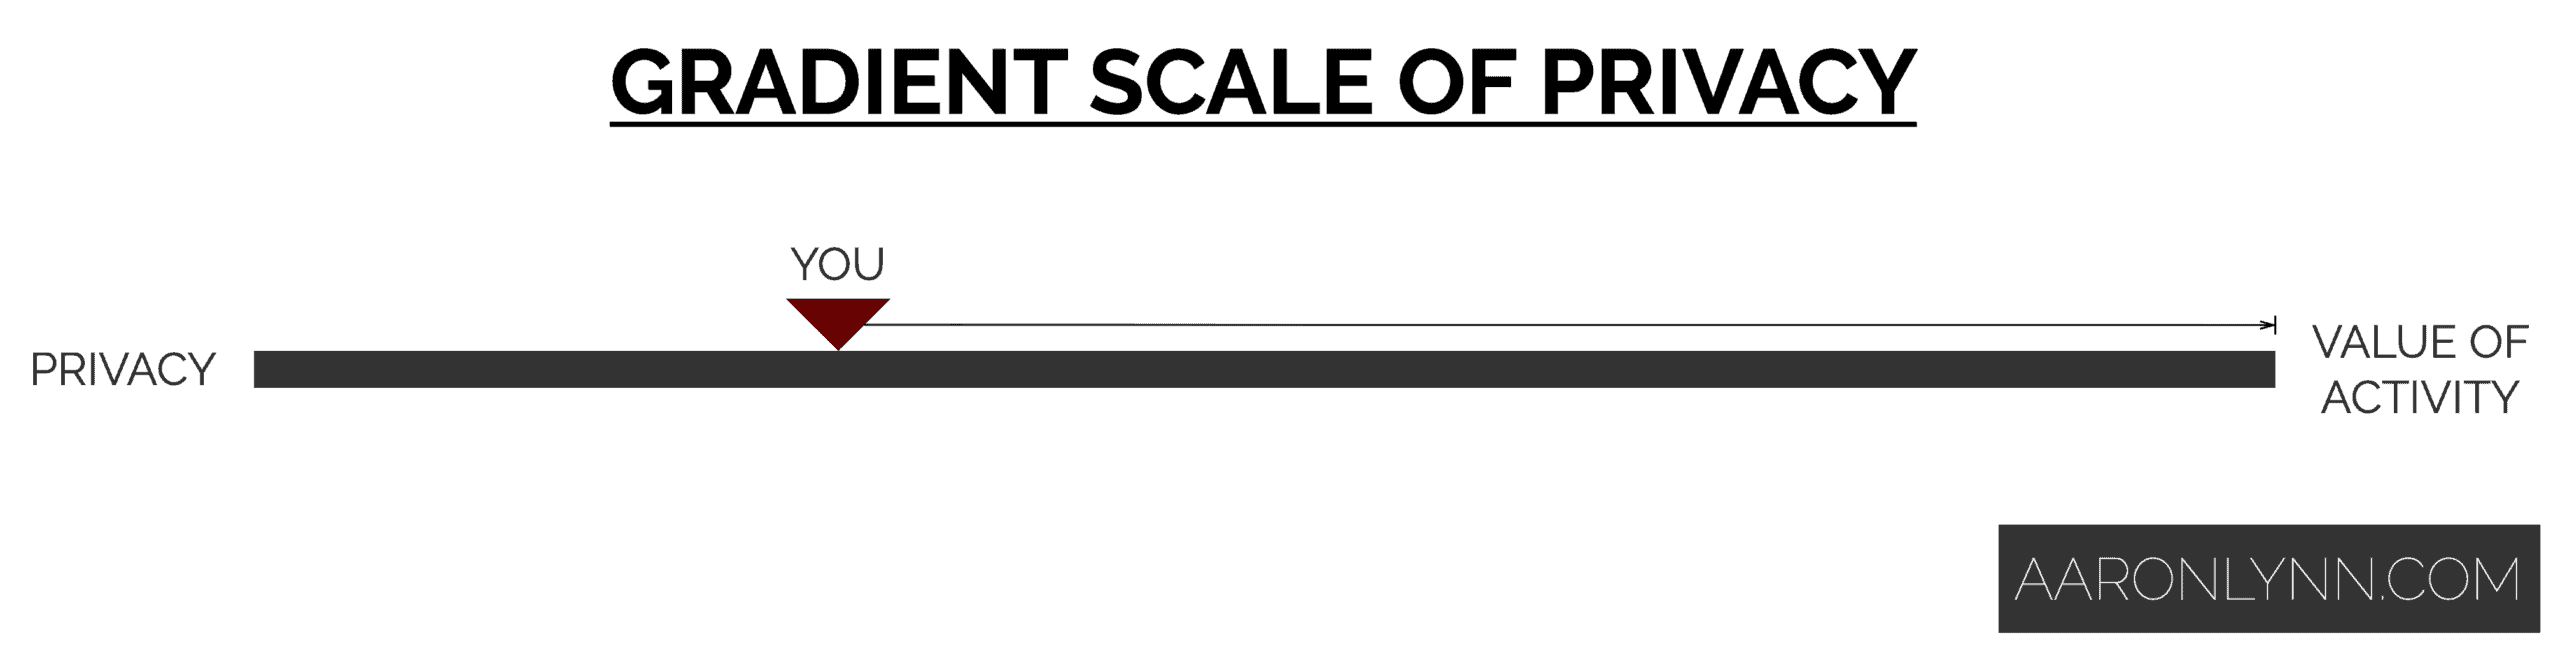 Gradient Scale of Privacy